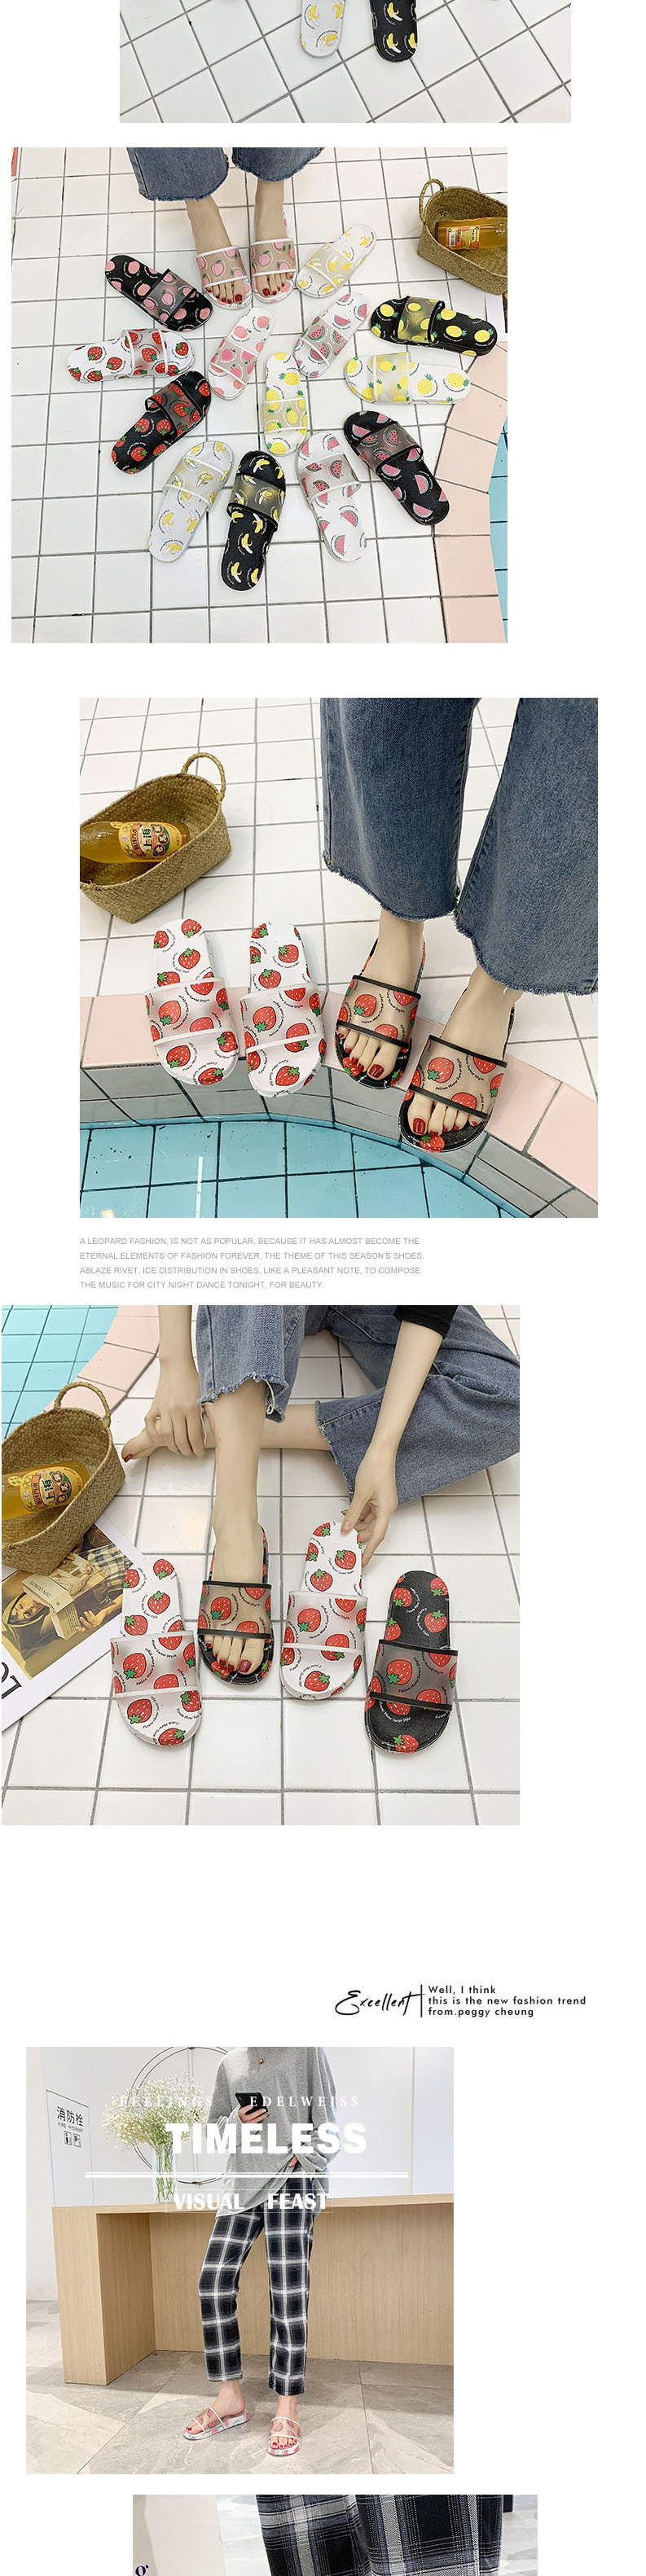 Fashion Pineapple With White Fruit Fruit Sandals,Slippers